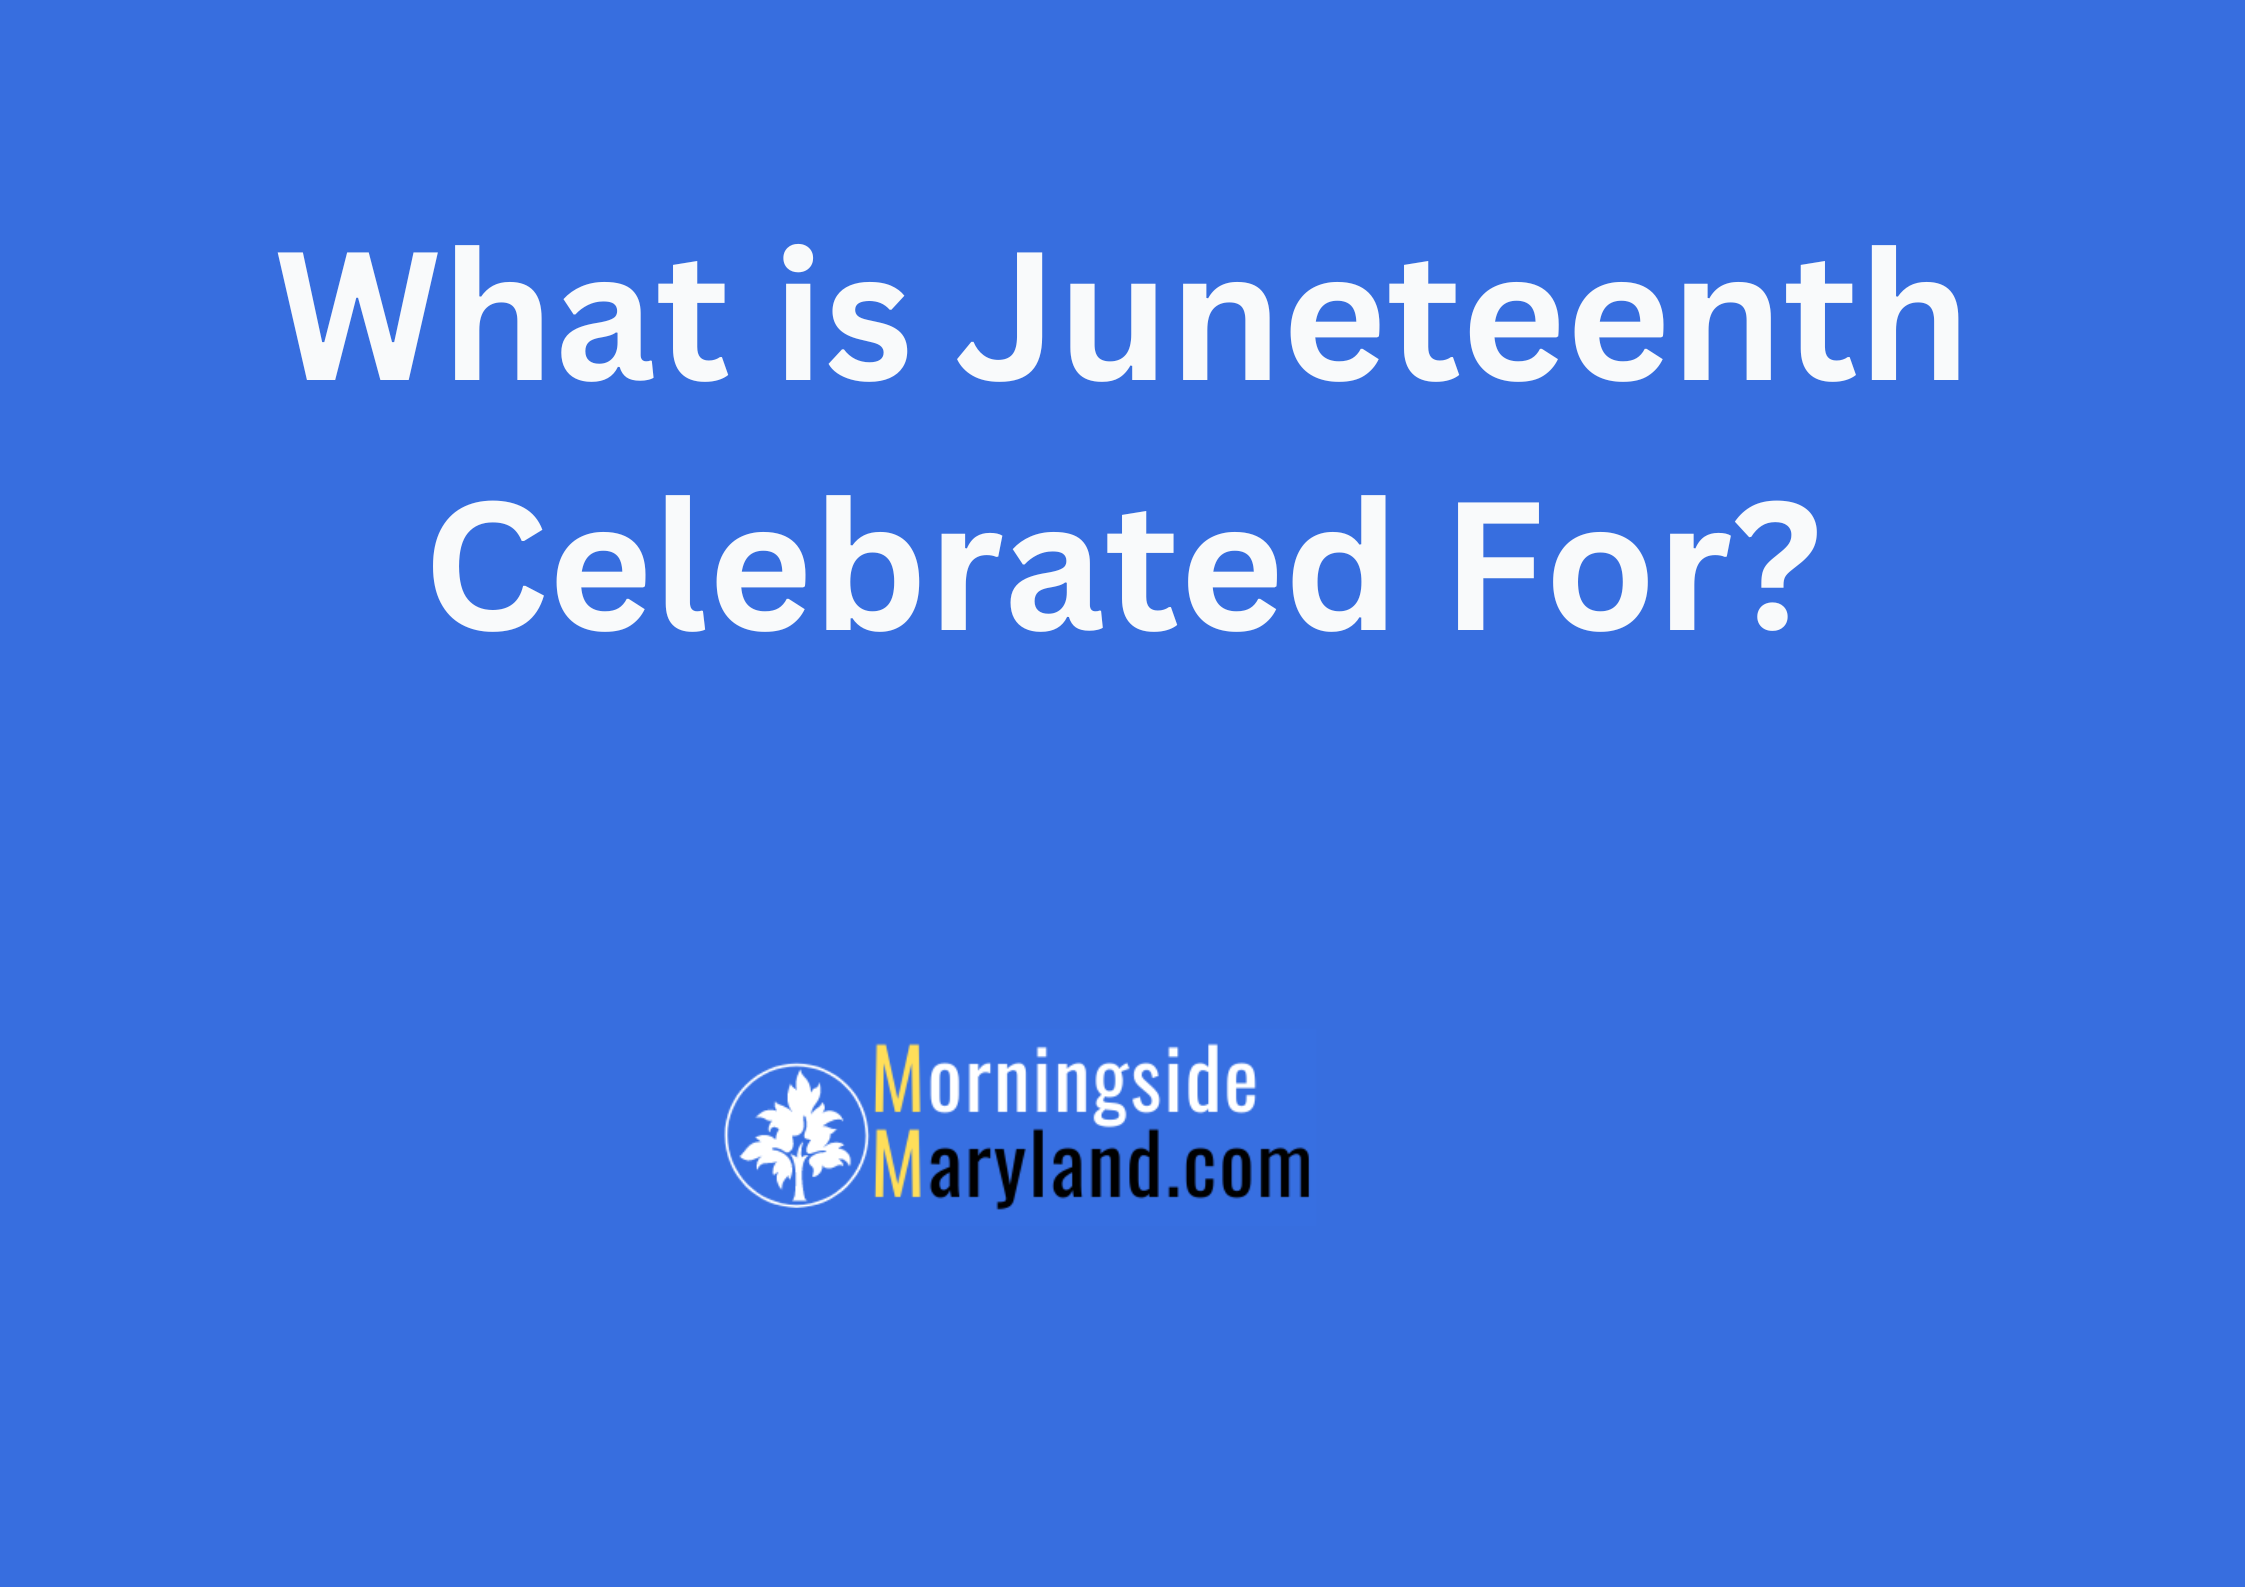 What is Juneteenth Celebrated For?